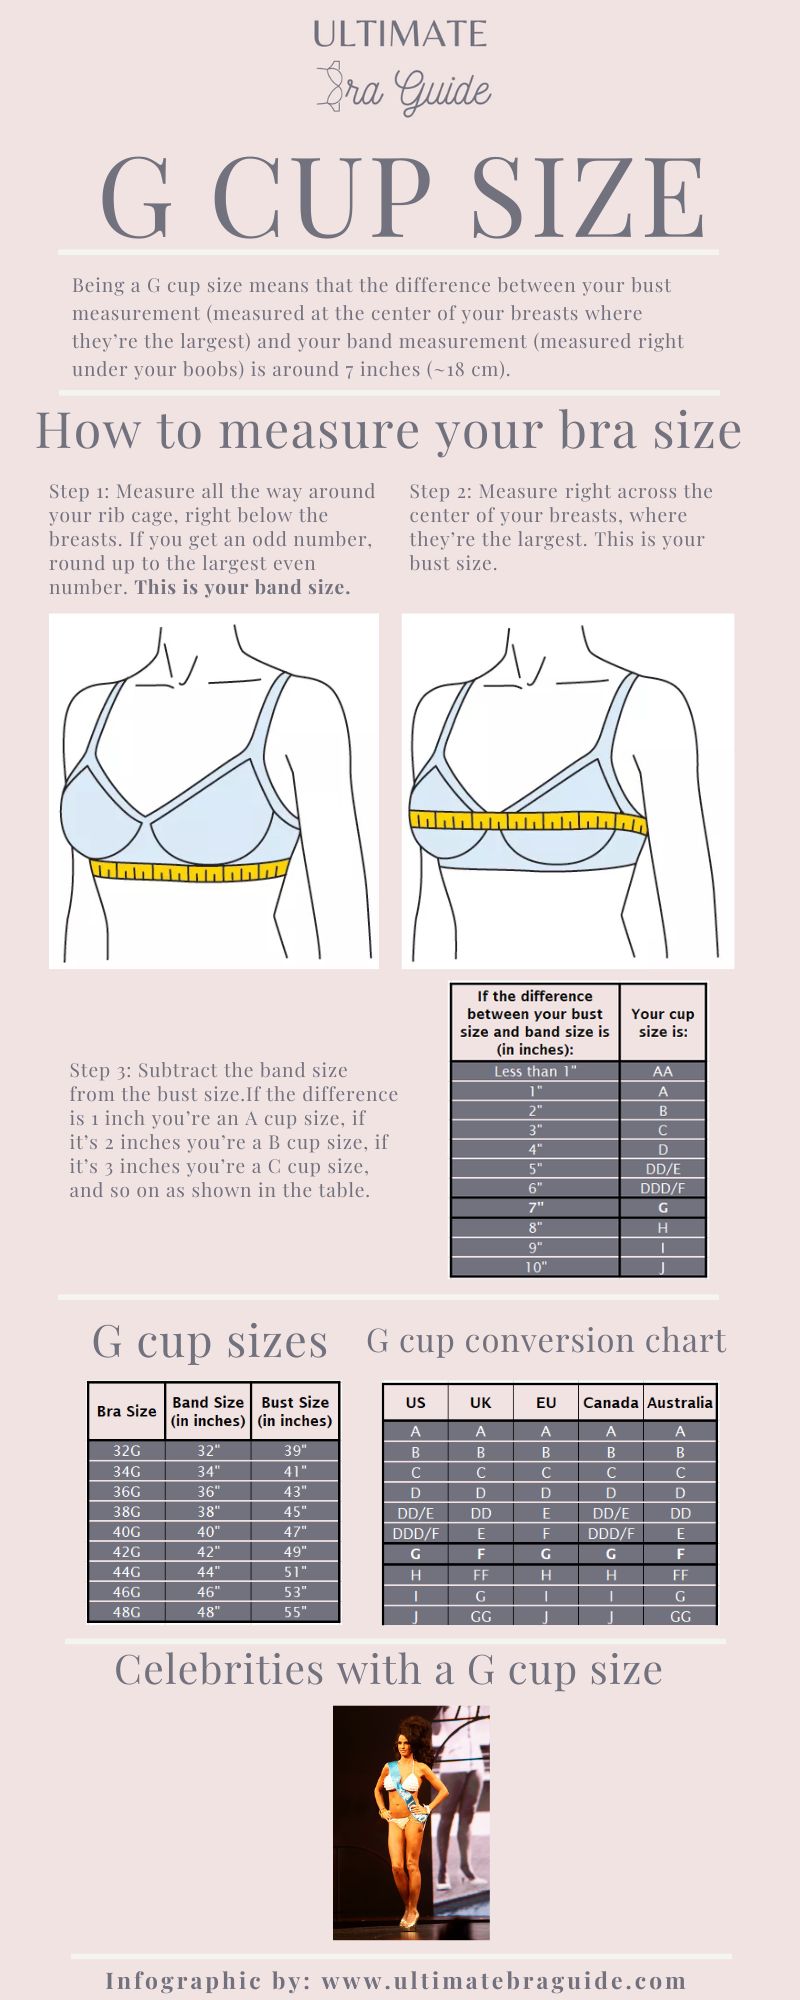 An infographic all about the G cup size - what it is, how to measure if you're G cup, a G cup conversion chart, G cup examples, and so on